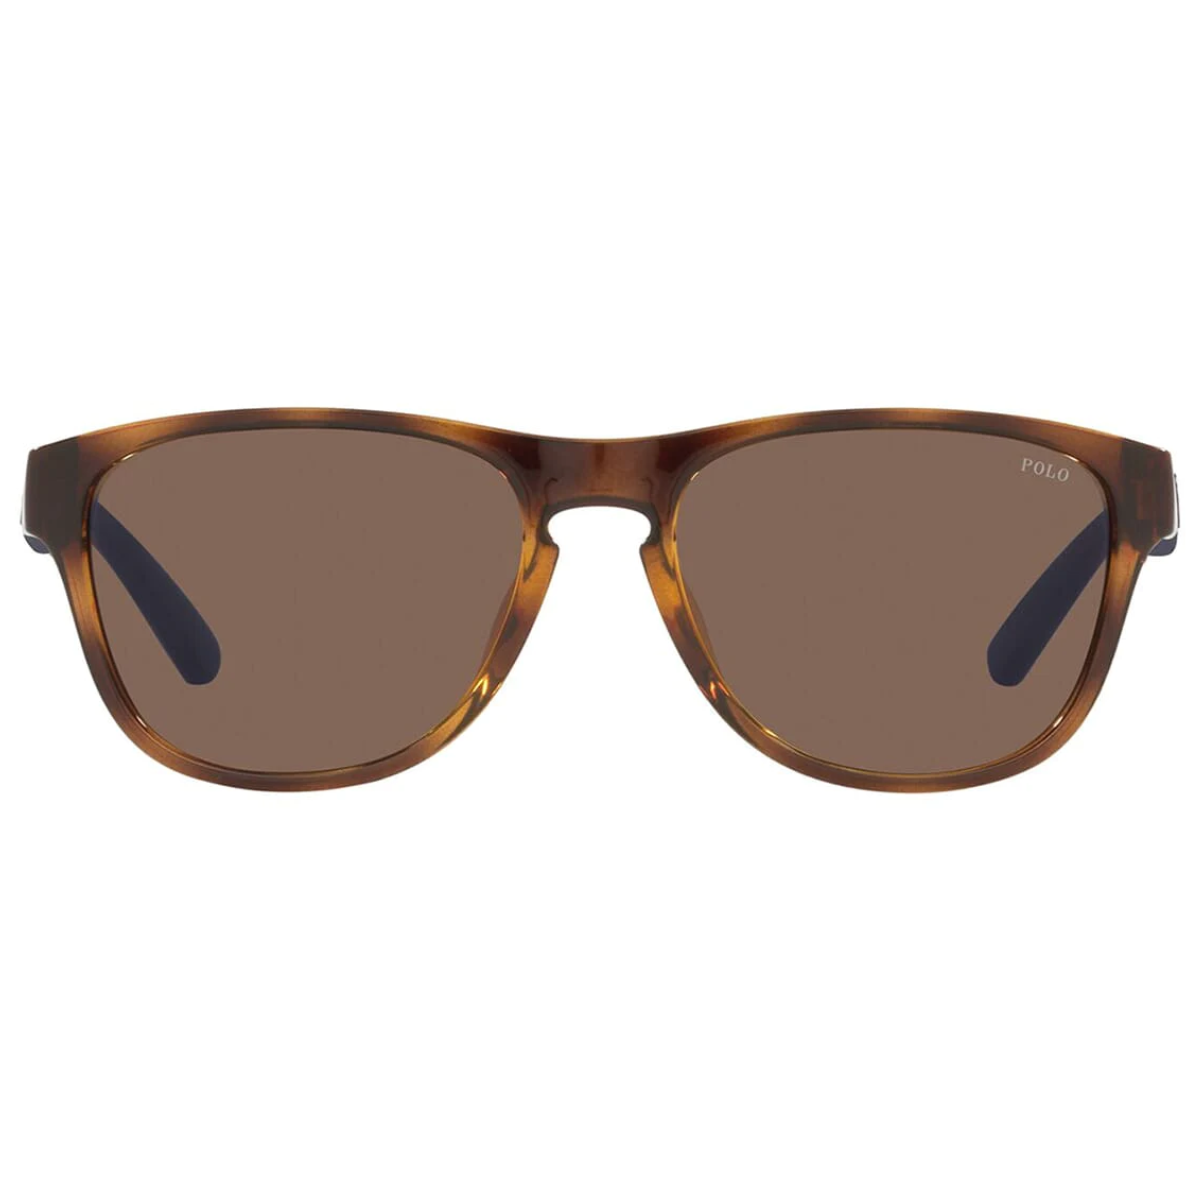 "Ralph Lauren Polo PH4180U Square Sunglasses for Men - Optorium: Stylish, high-quality sunglasses with acetate frames and polycarbonate lenses. Available in light grey and light brown colors. Shop now at Optorium for your perfect pair of cooling sunglasses."